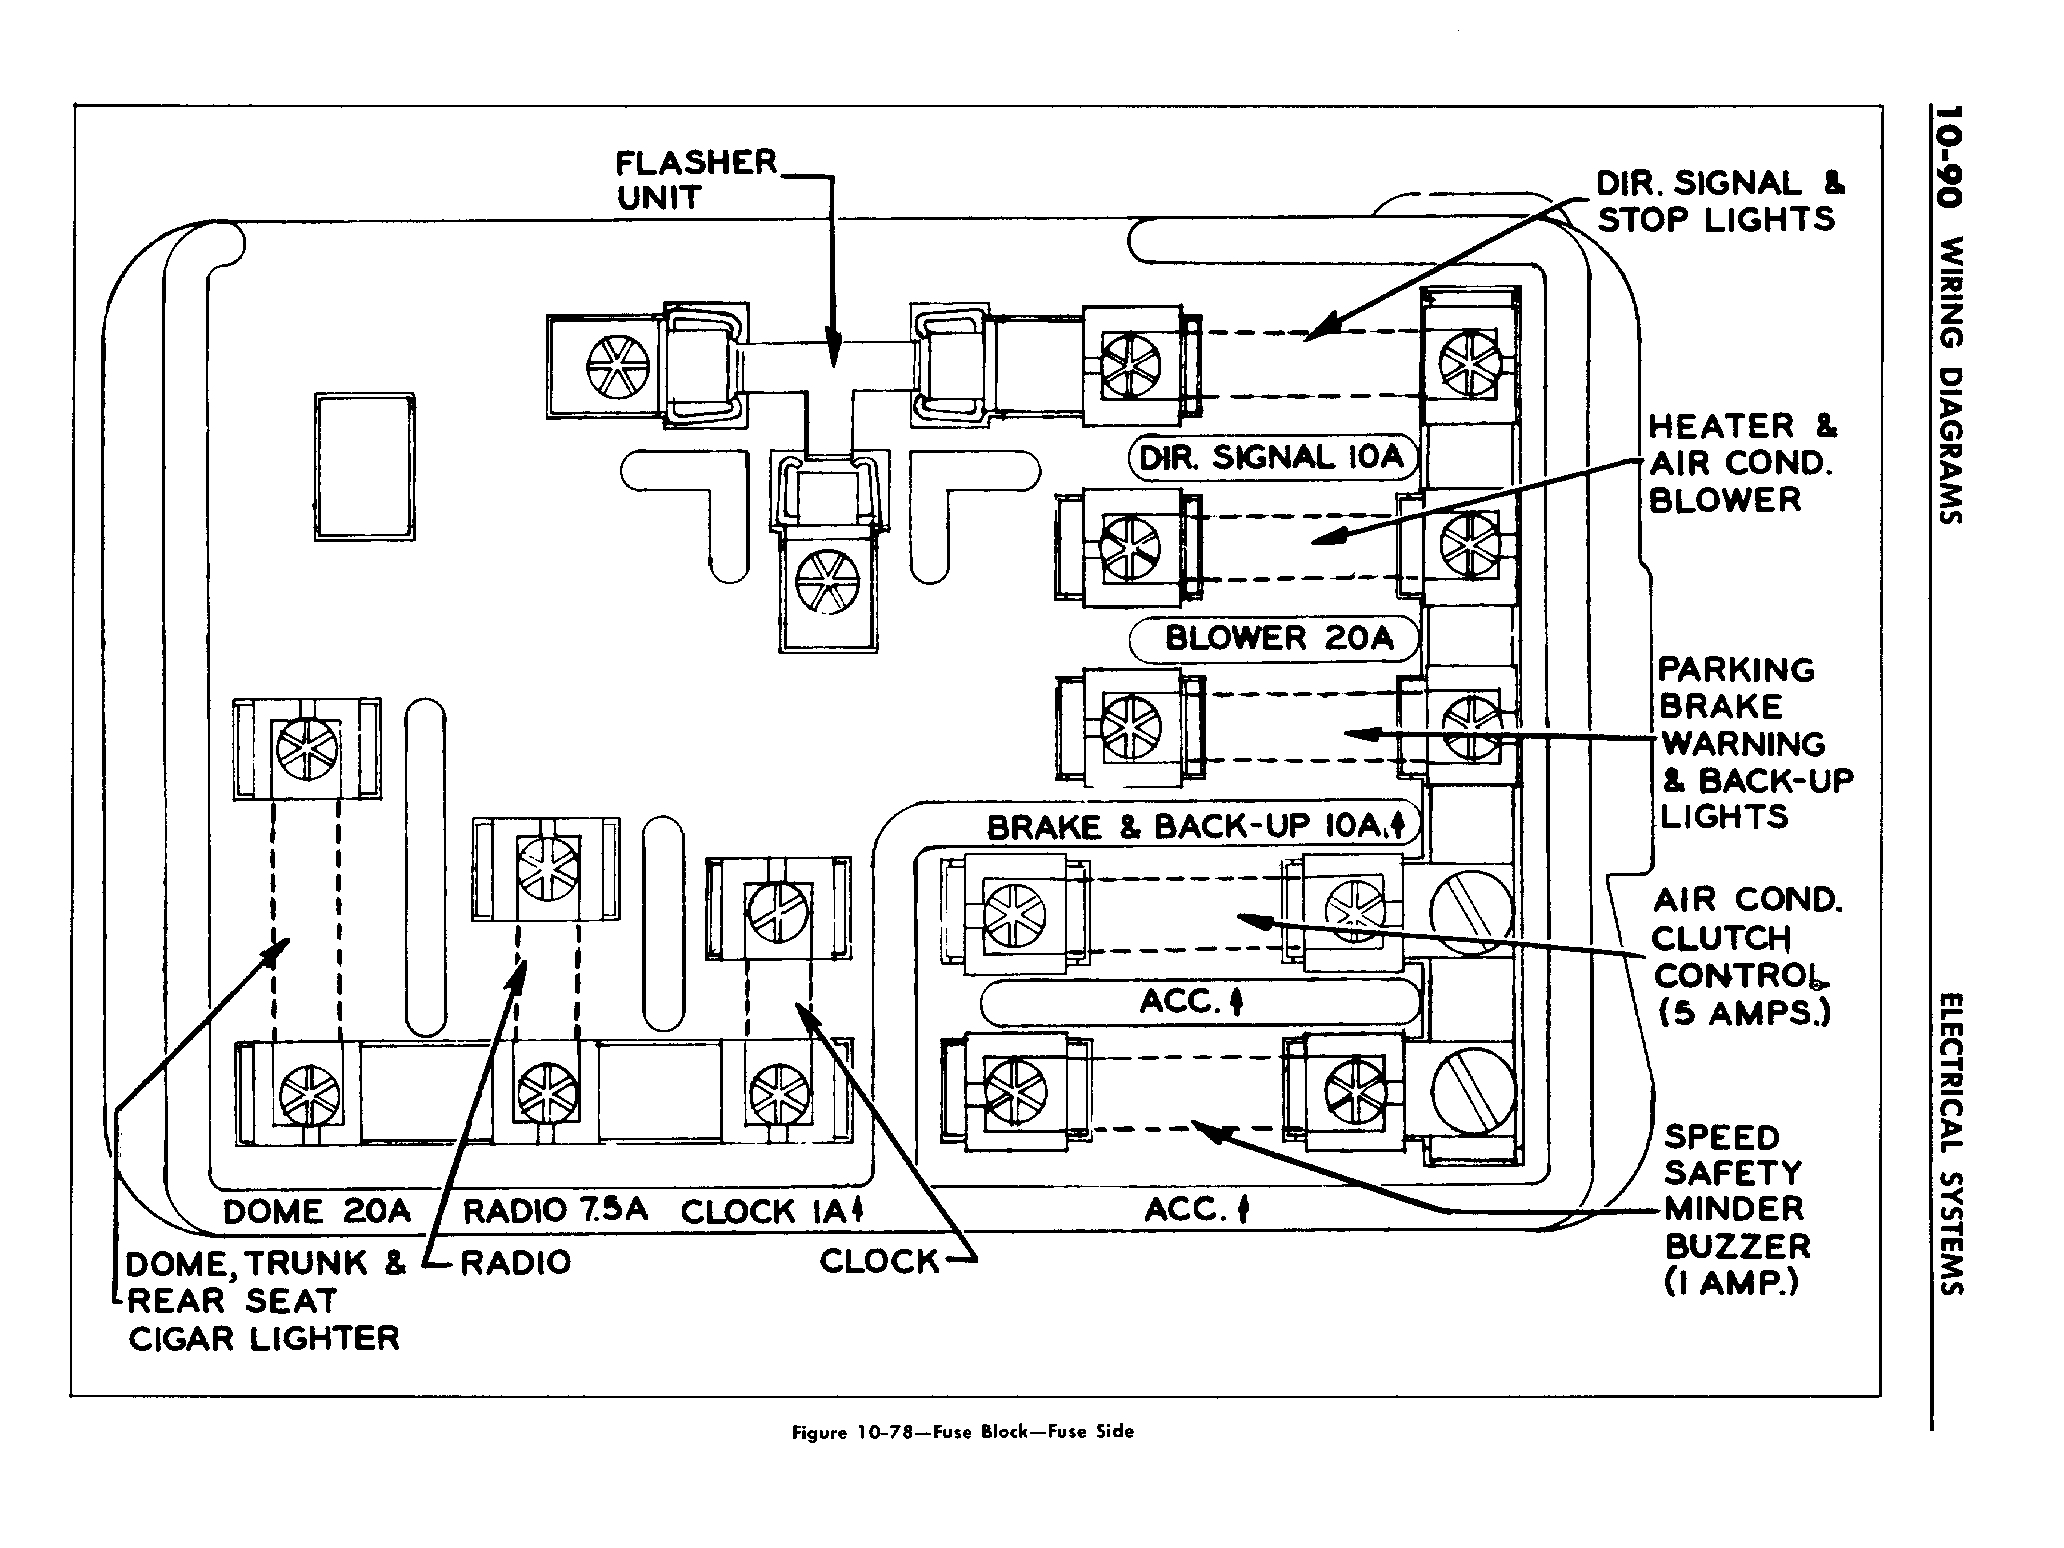 n_11 1958 Buick Shop Manual - Electrical Systems_90.jpg